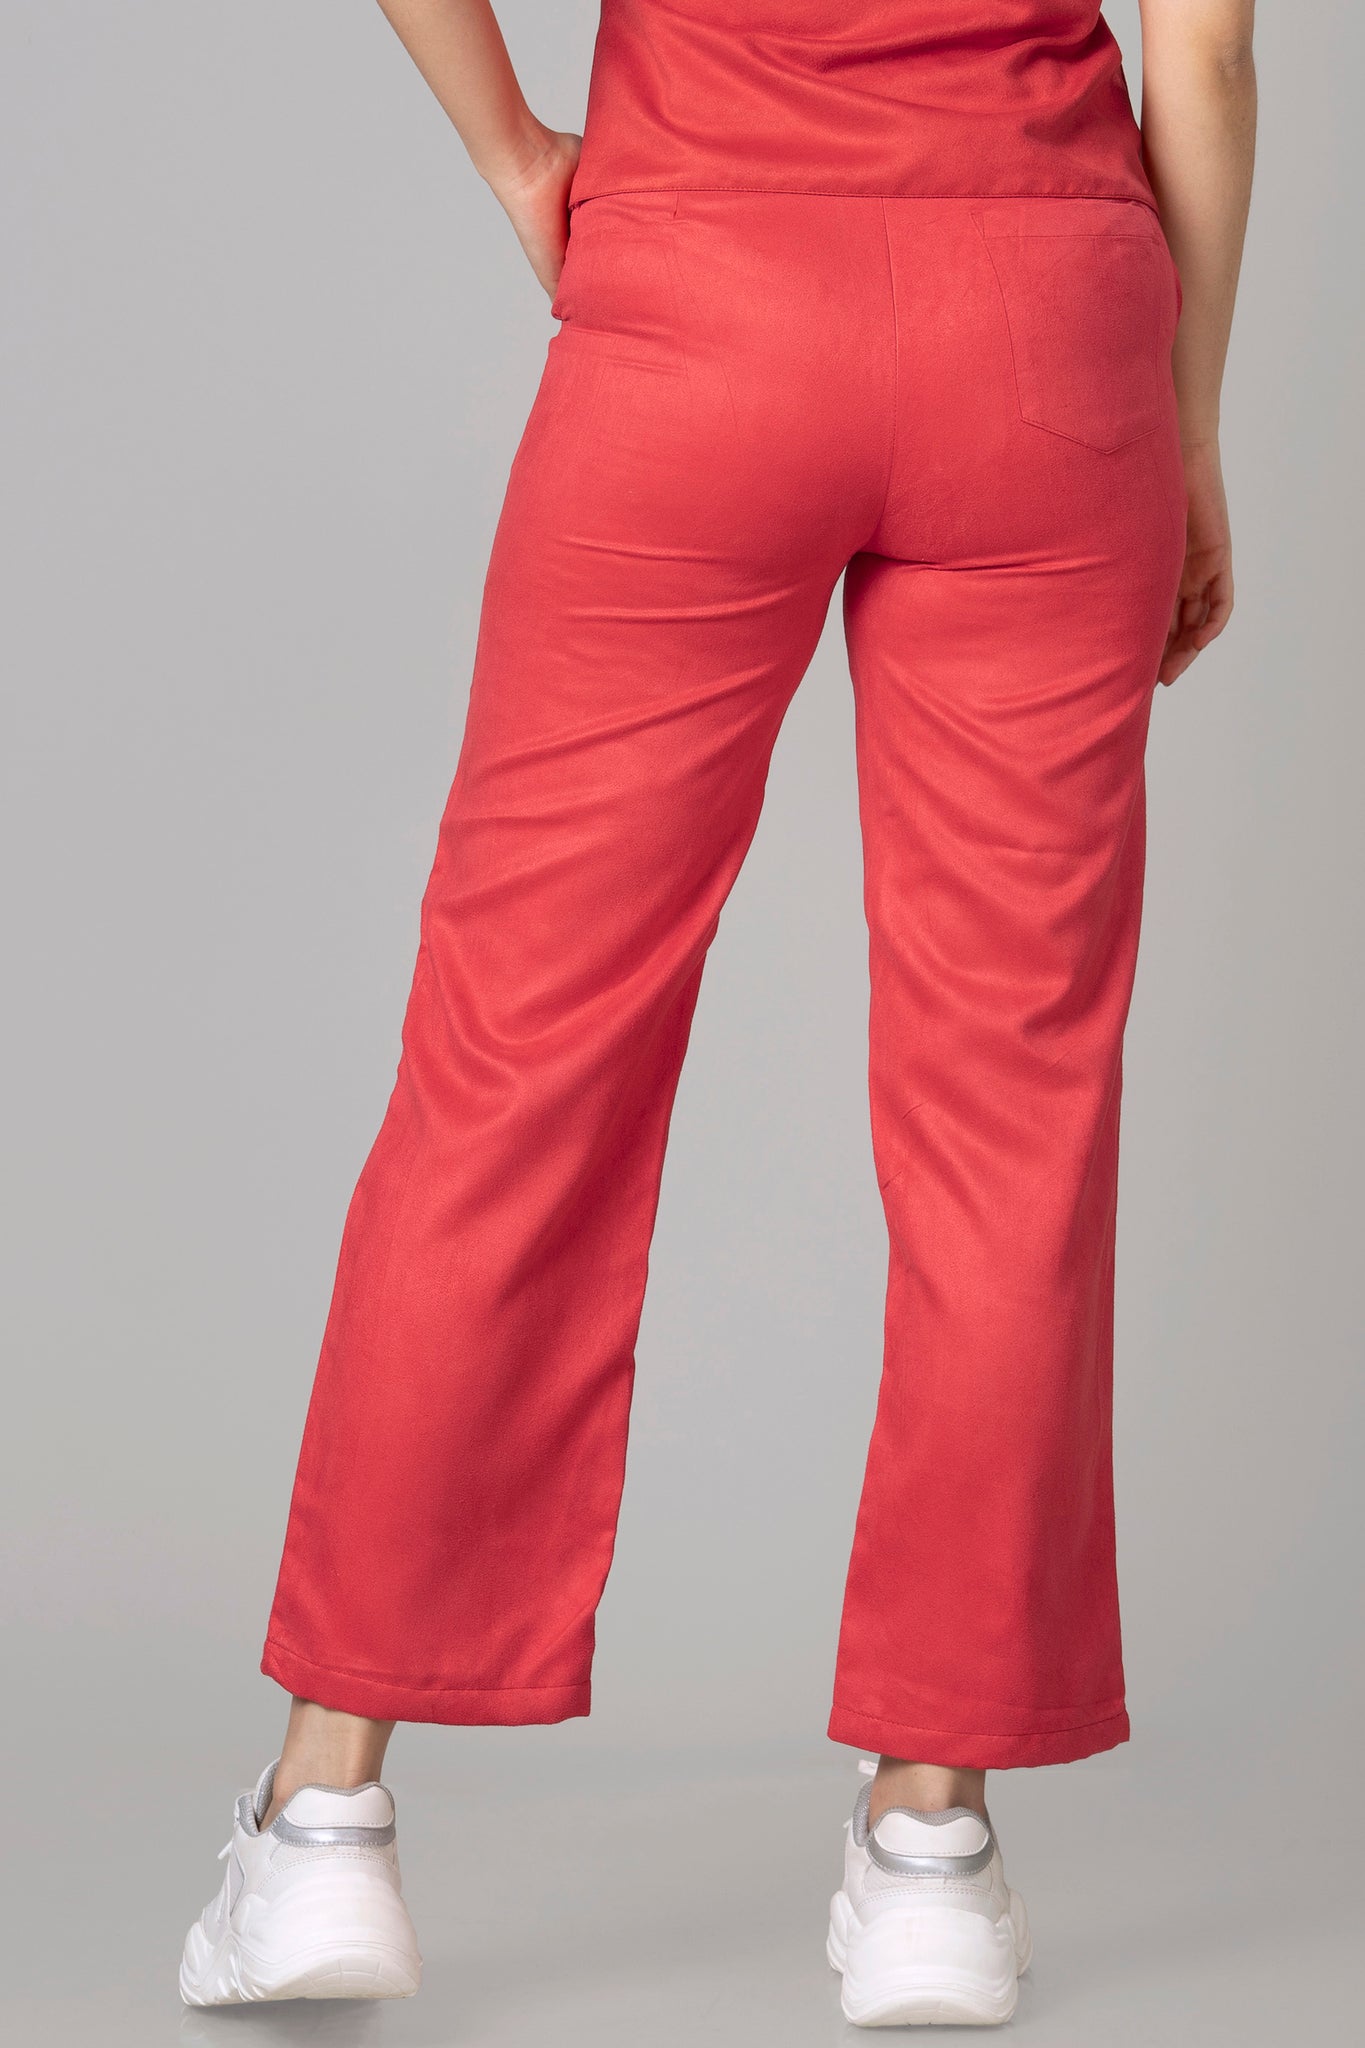 Call Me Paris Red Suede Trouser For Women